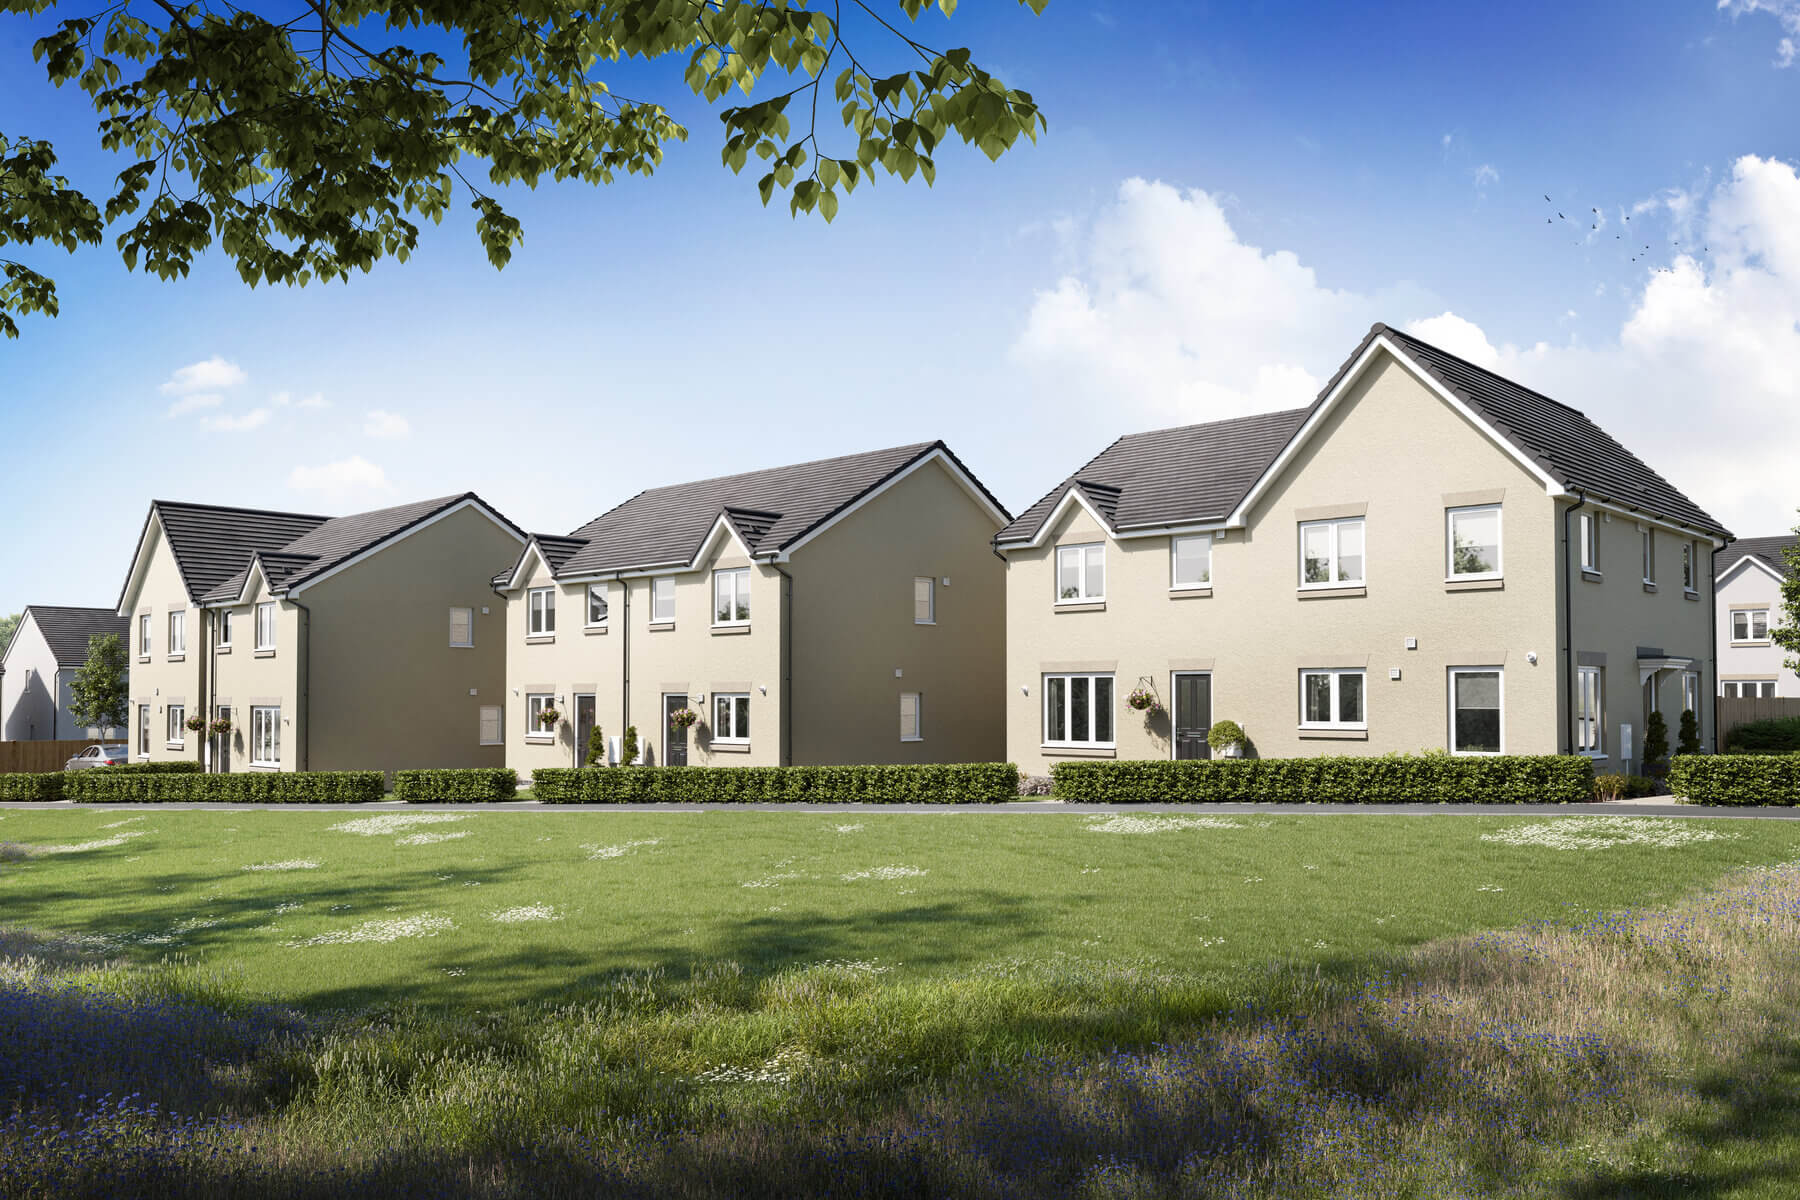 Taylor Wimpey submits detailed plans for second new development in Winchburgh